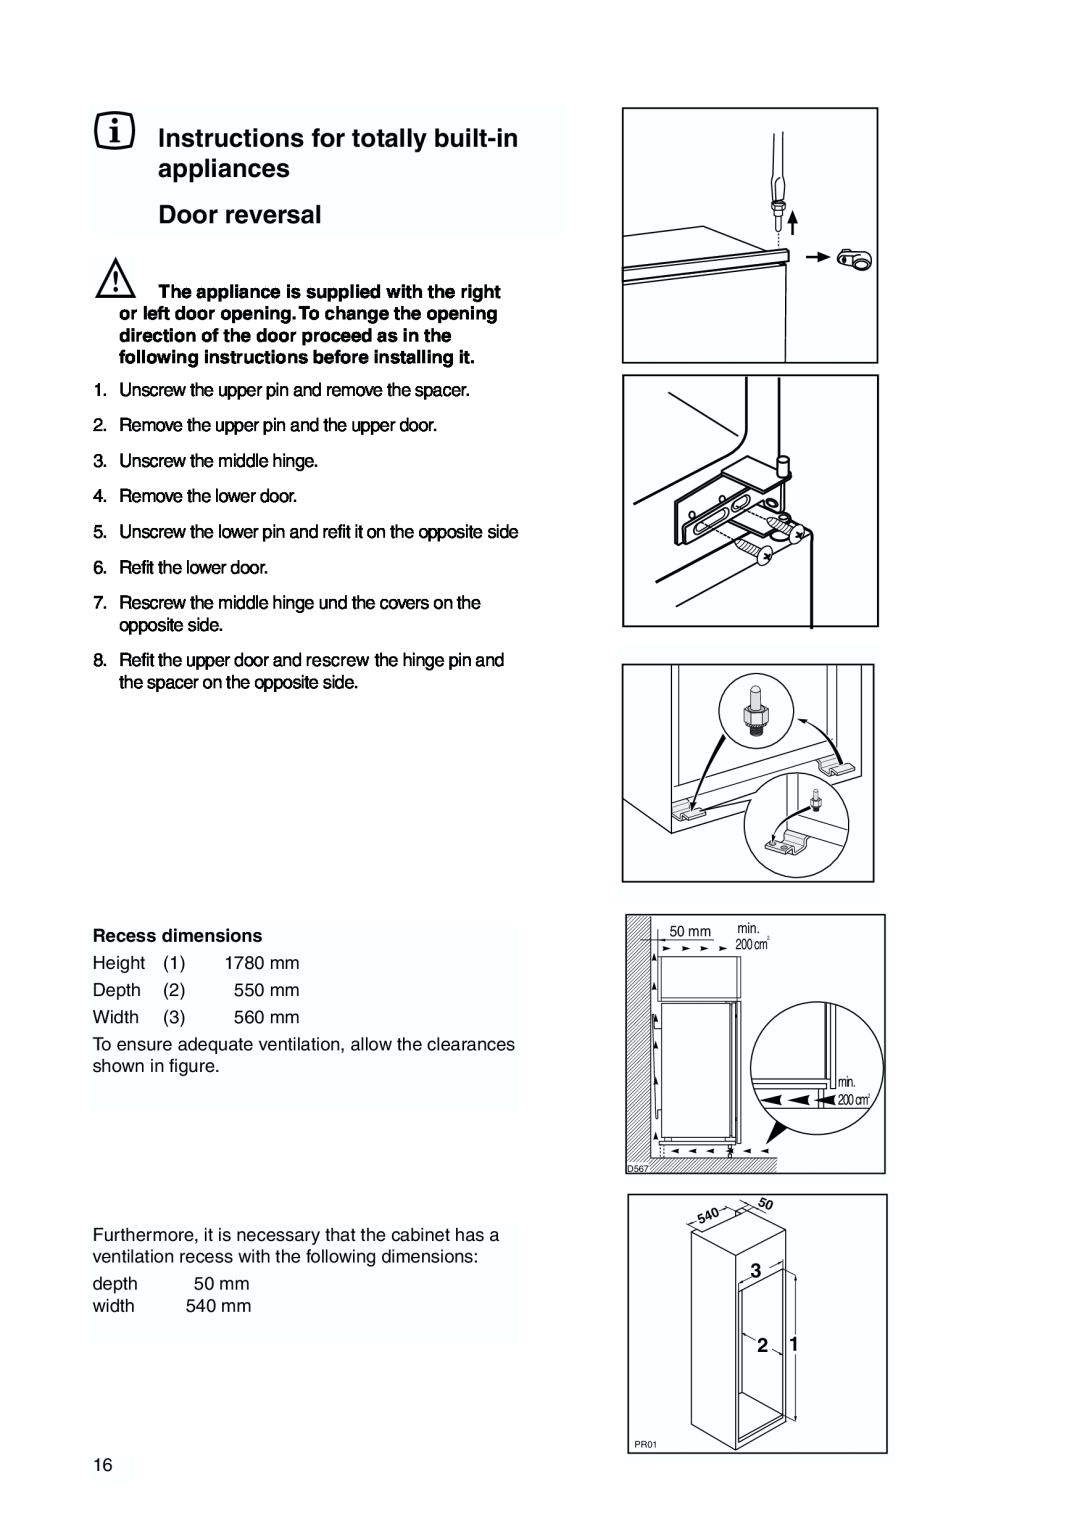 Zanussi ZBB 7294 manual Instructions for totally built-inappliances, Door reversal, Recess dimensions 